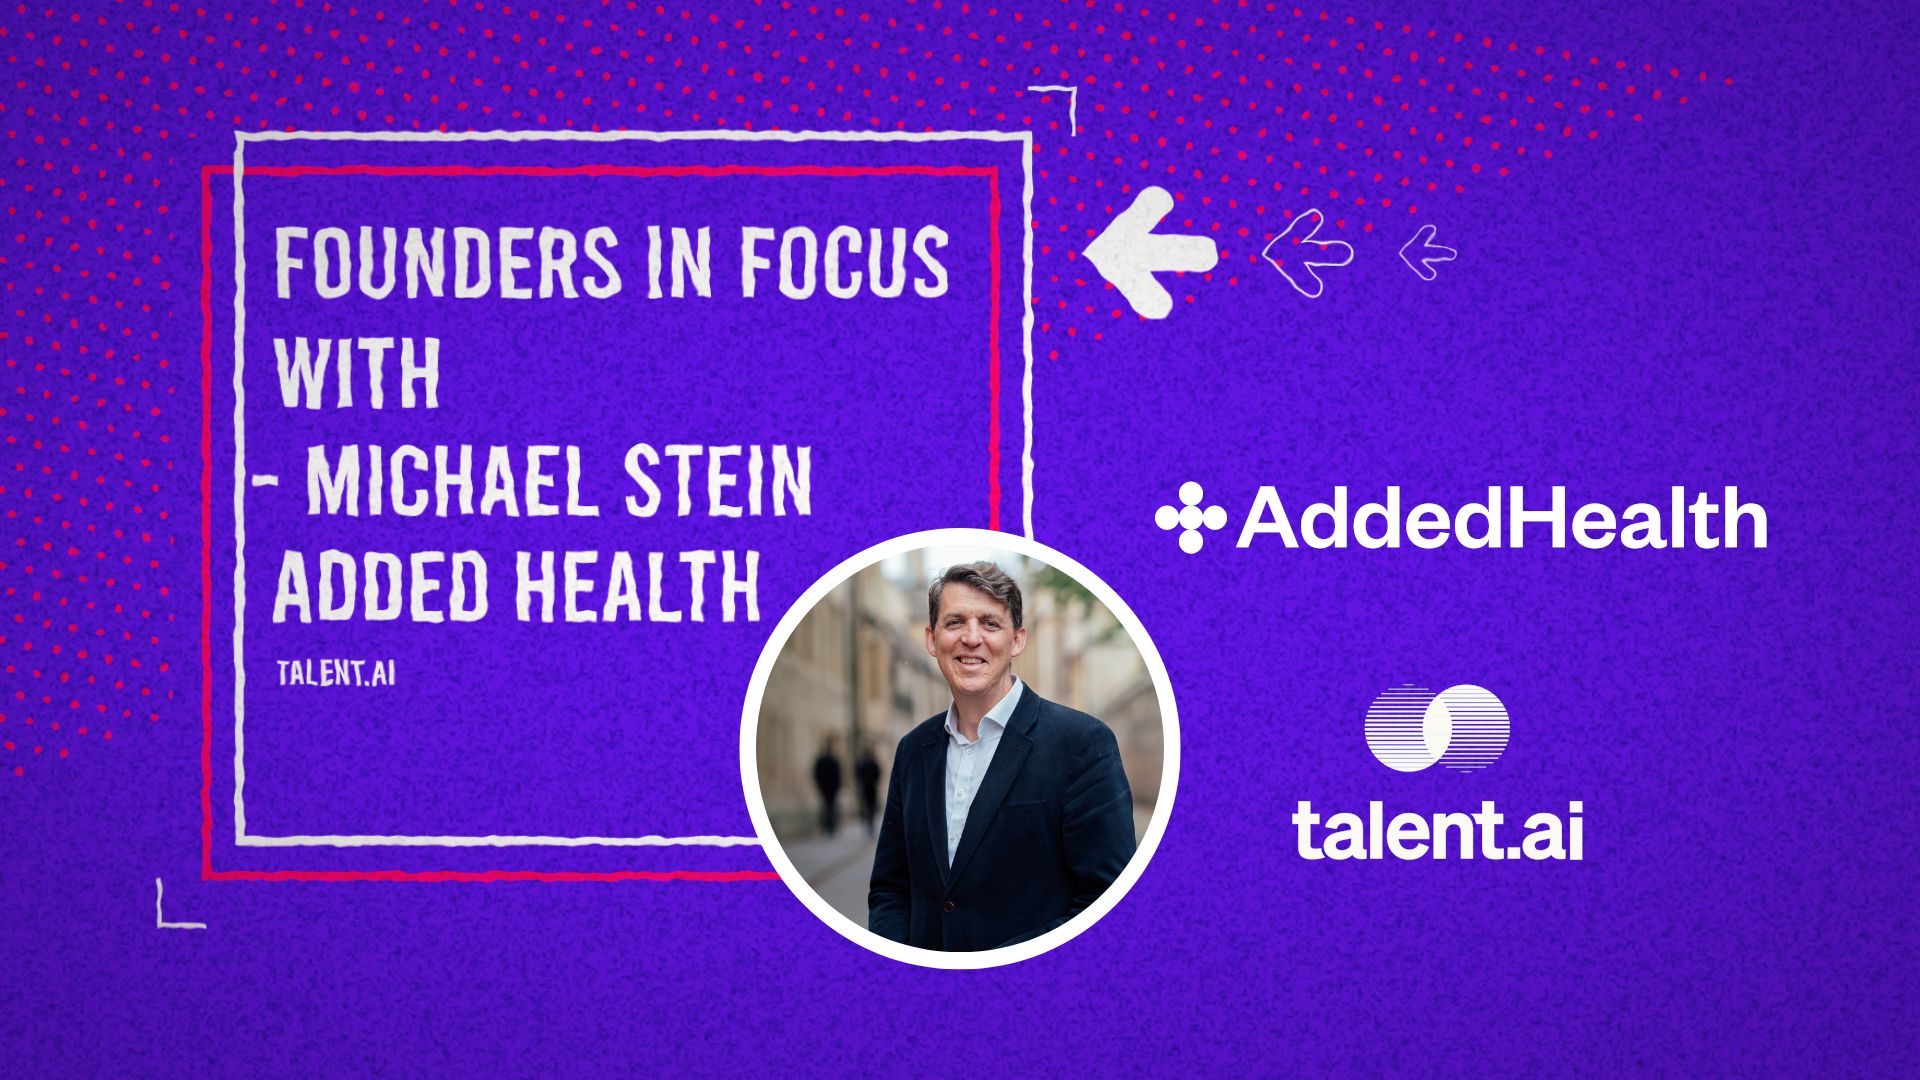 Michael Stein, CEO & Founder, on how he turned the shocking passing of his dear friend, Dr Satish Keshav, into motivation to build a tool that can improve how we view and manage our health to live our lives to the full.